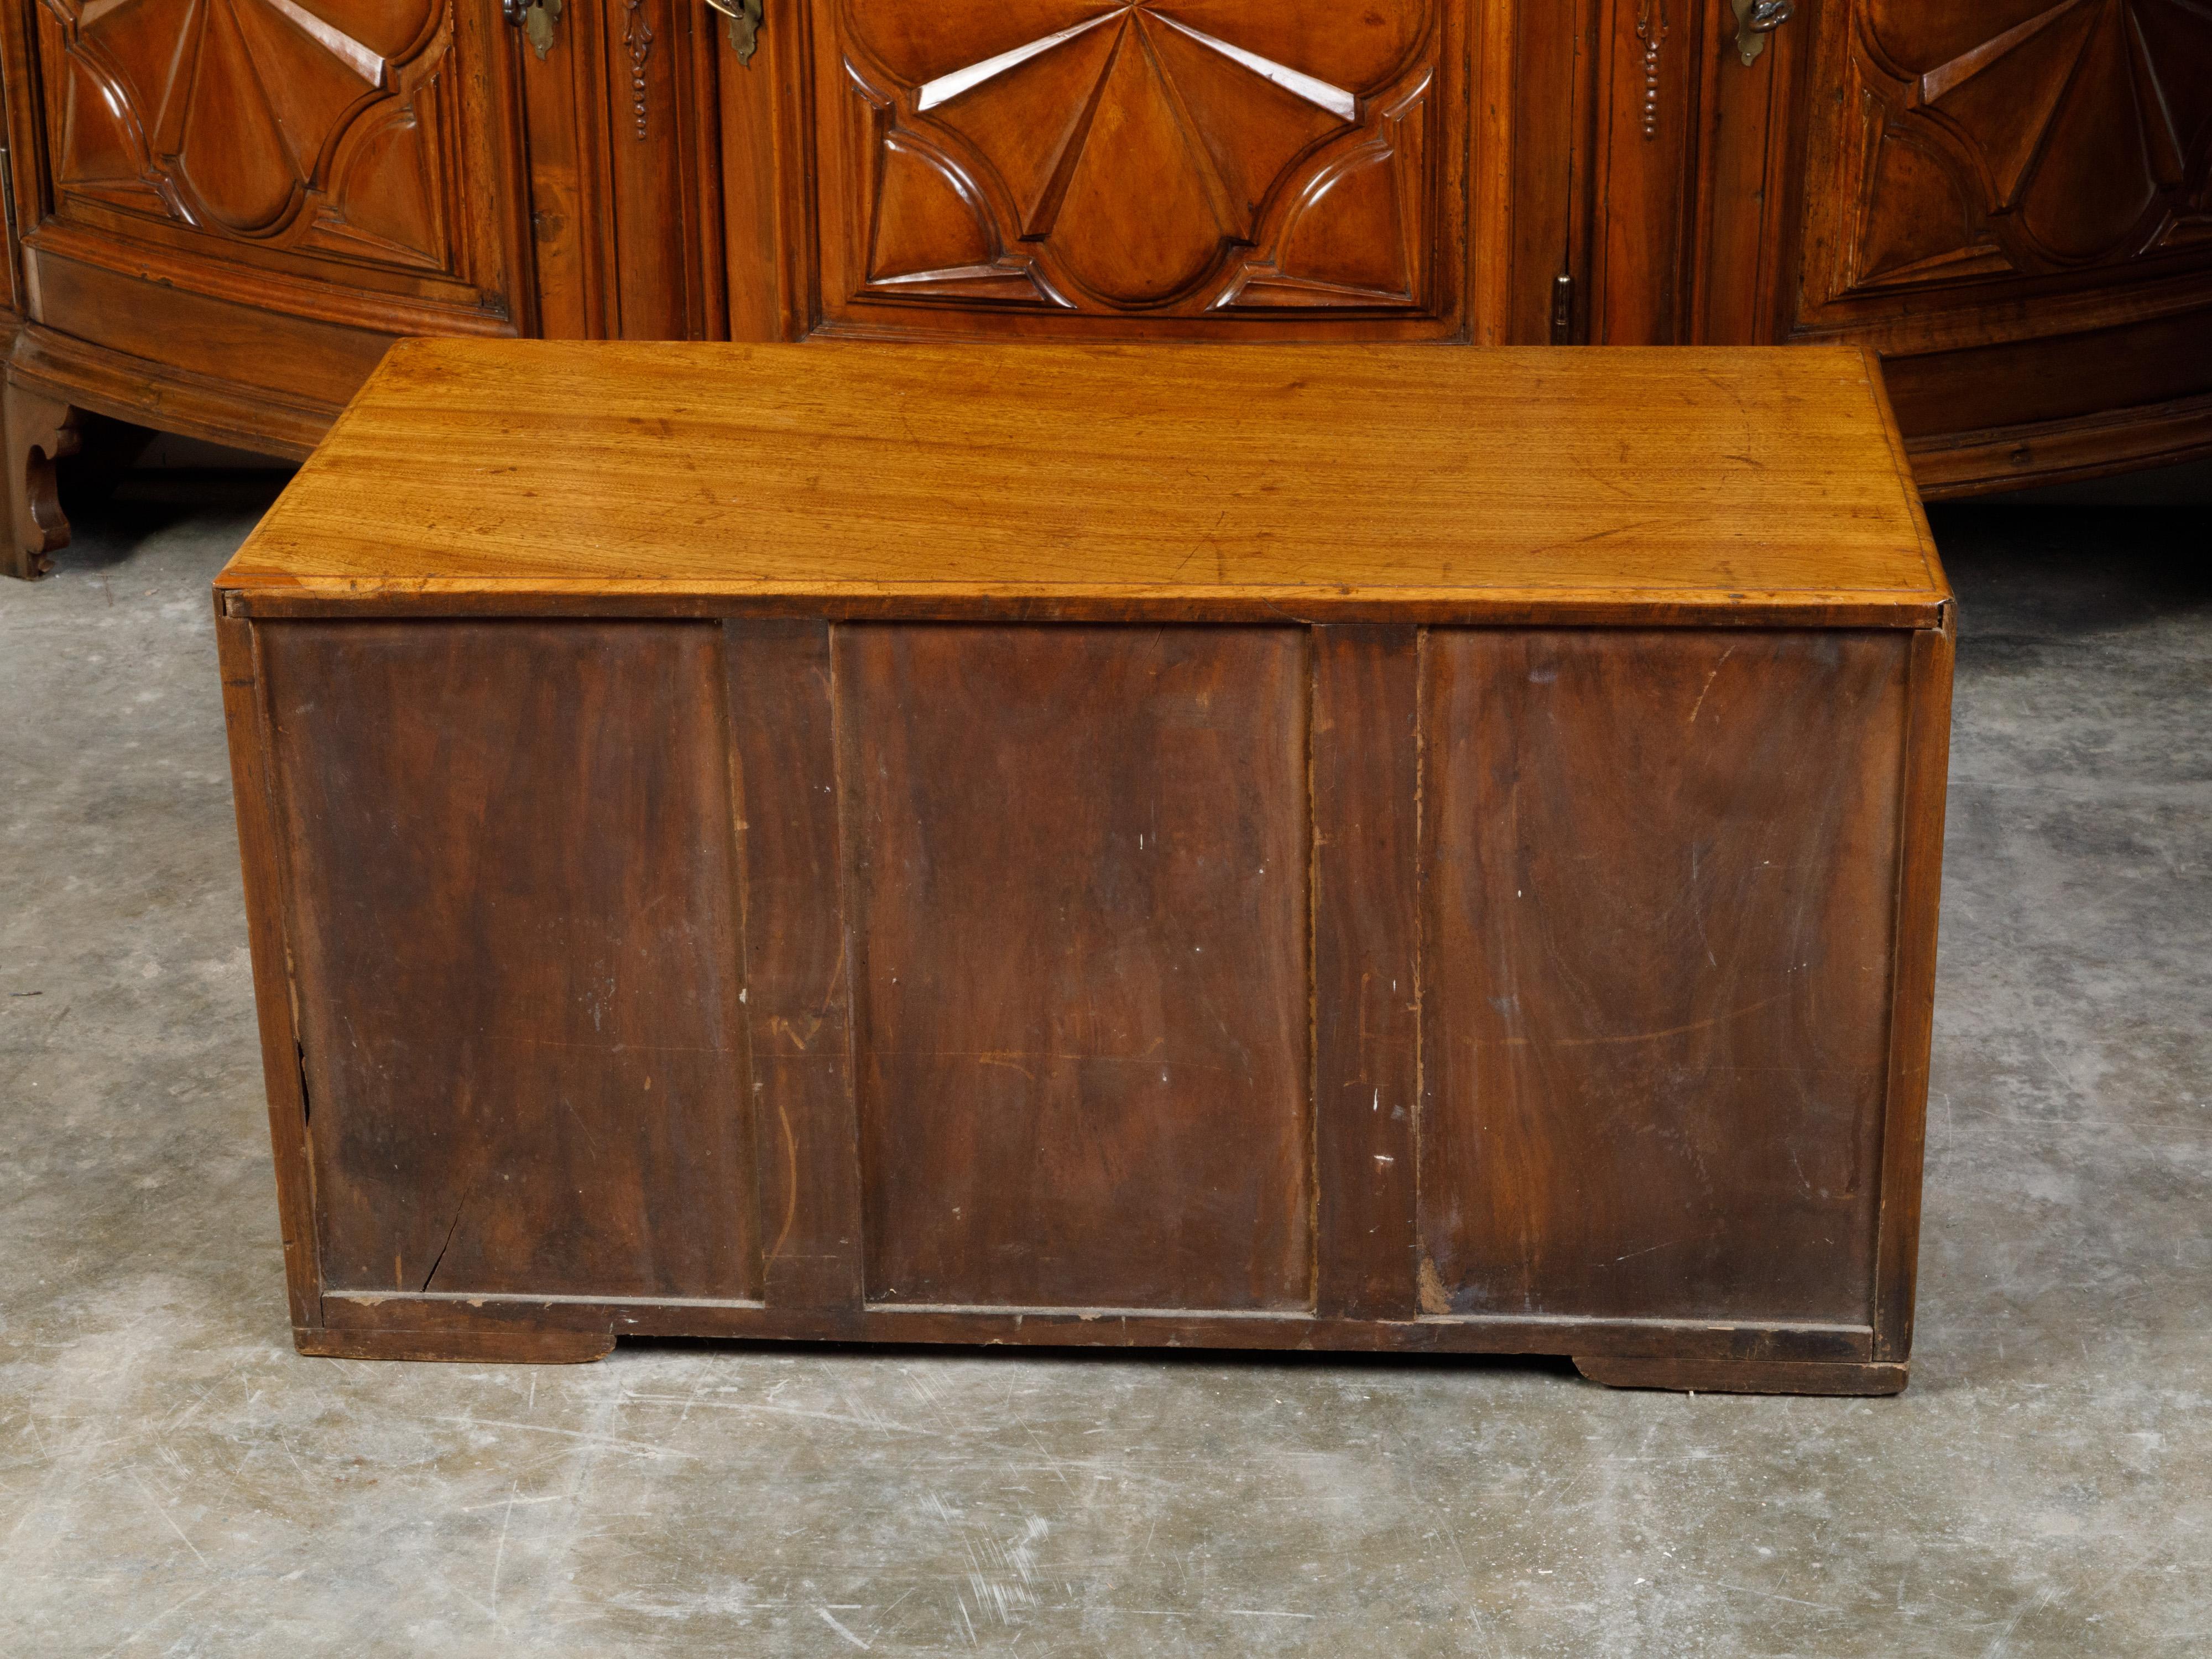 English Campaign 19th Century Camphor Wood Low Chest with Inset Brass Hardware For Sale 3